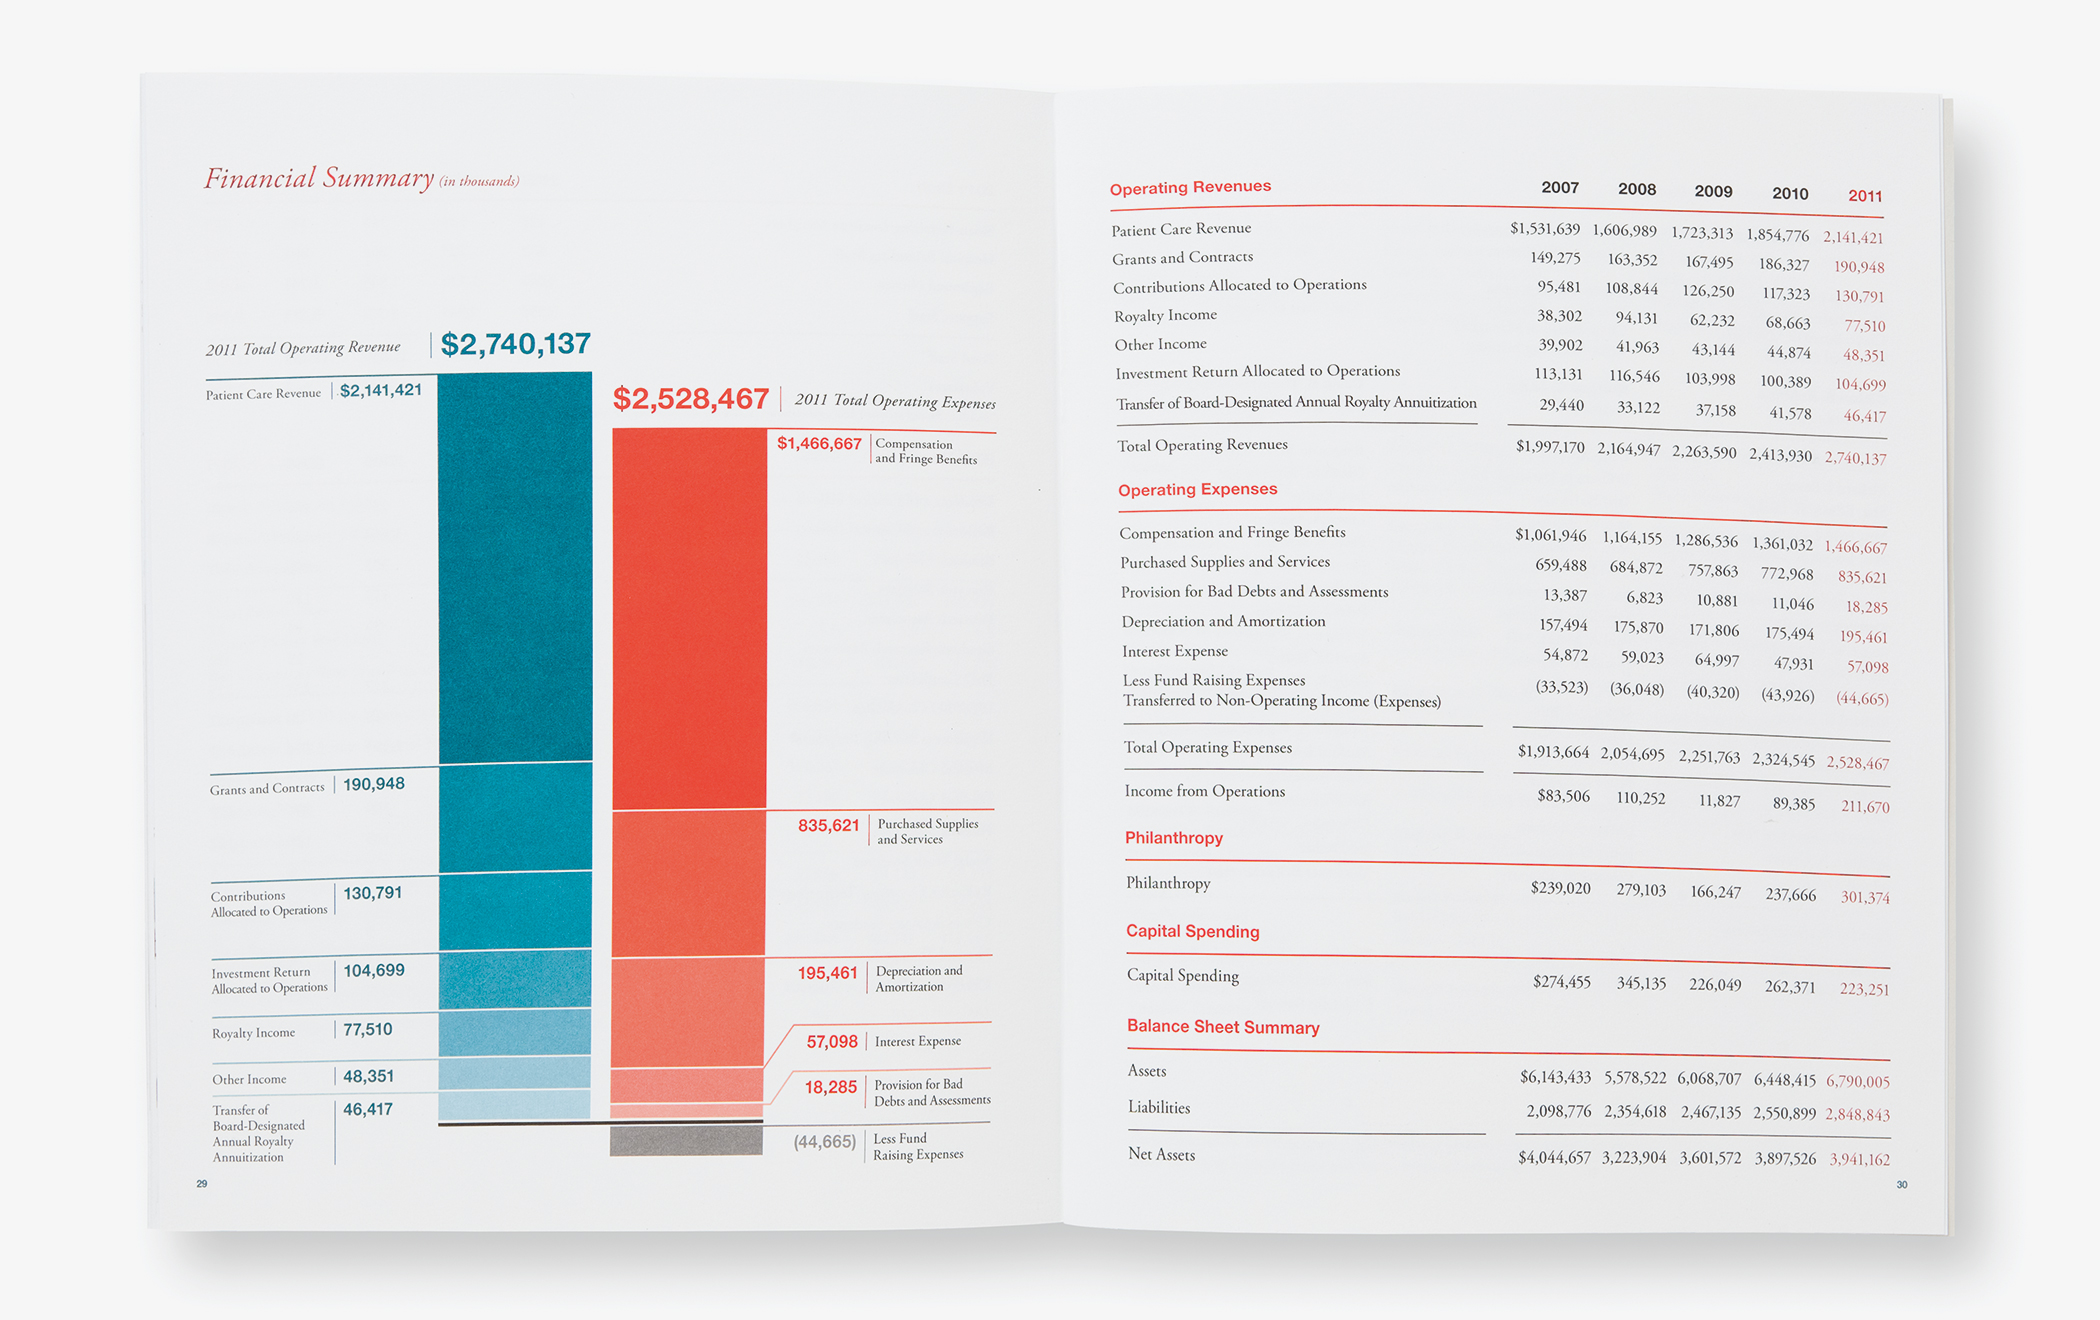 The financial summary pages of the Memorial Sloan-Kettering 2011 annual report with data charts and tables.